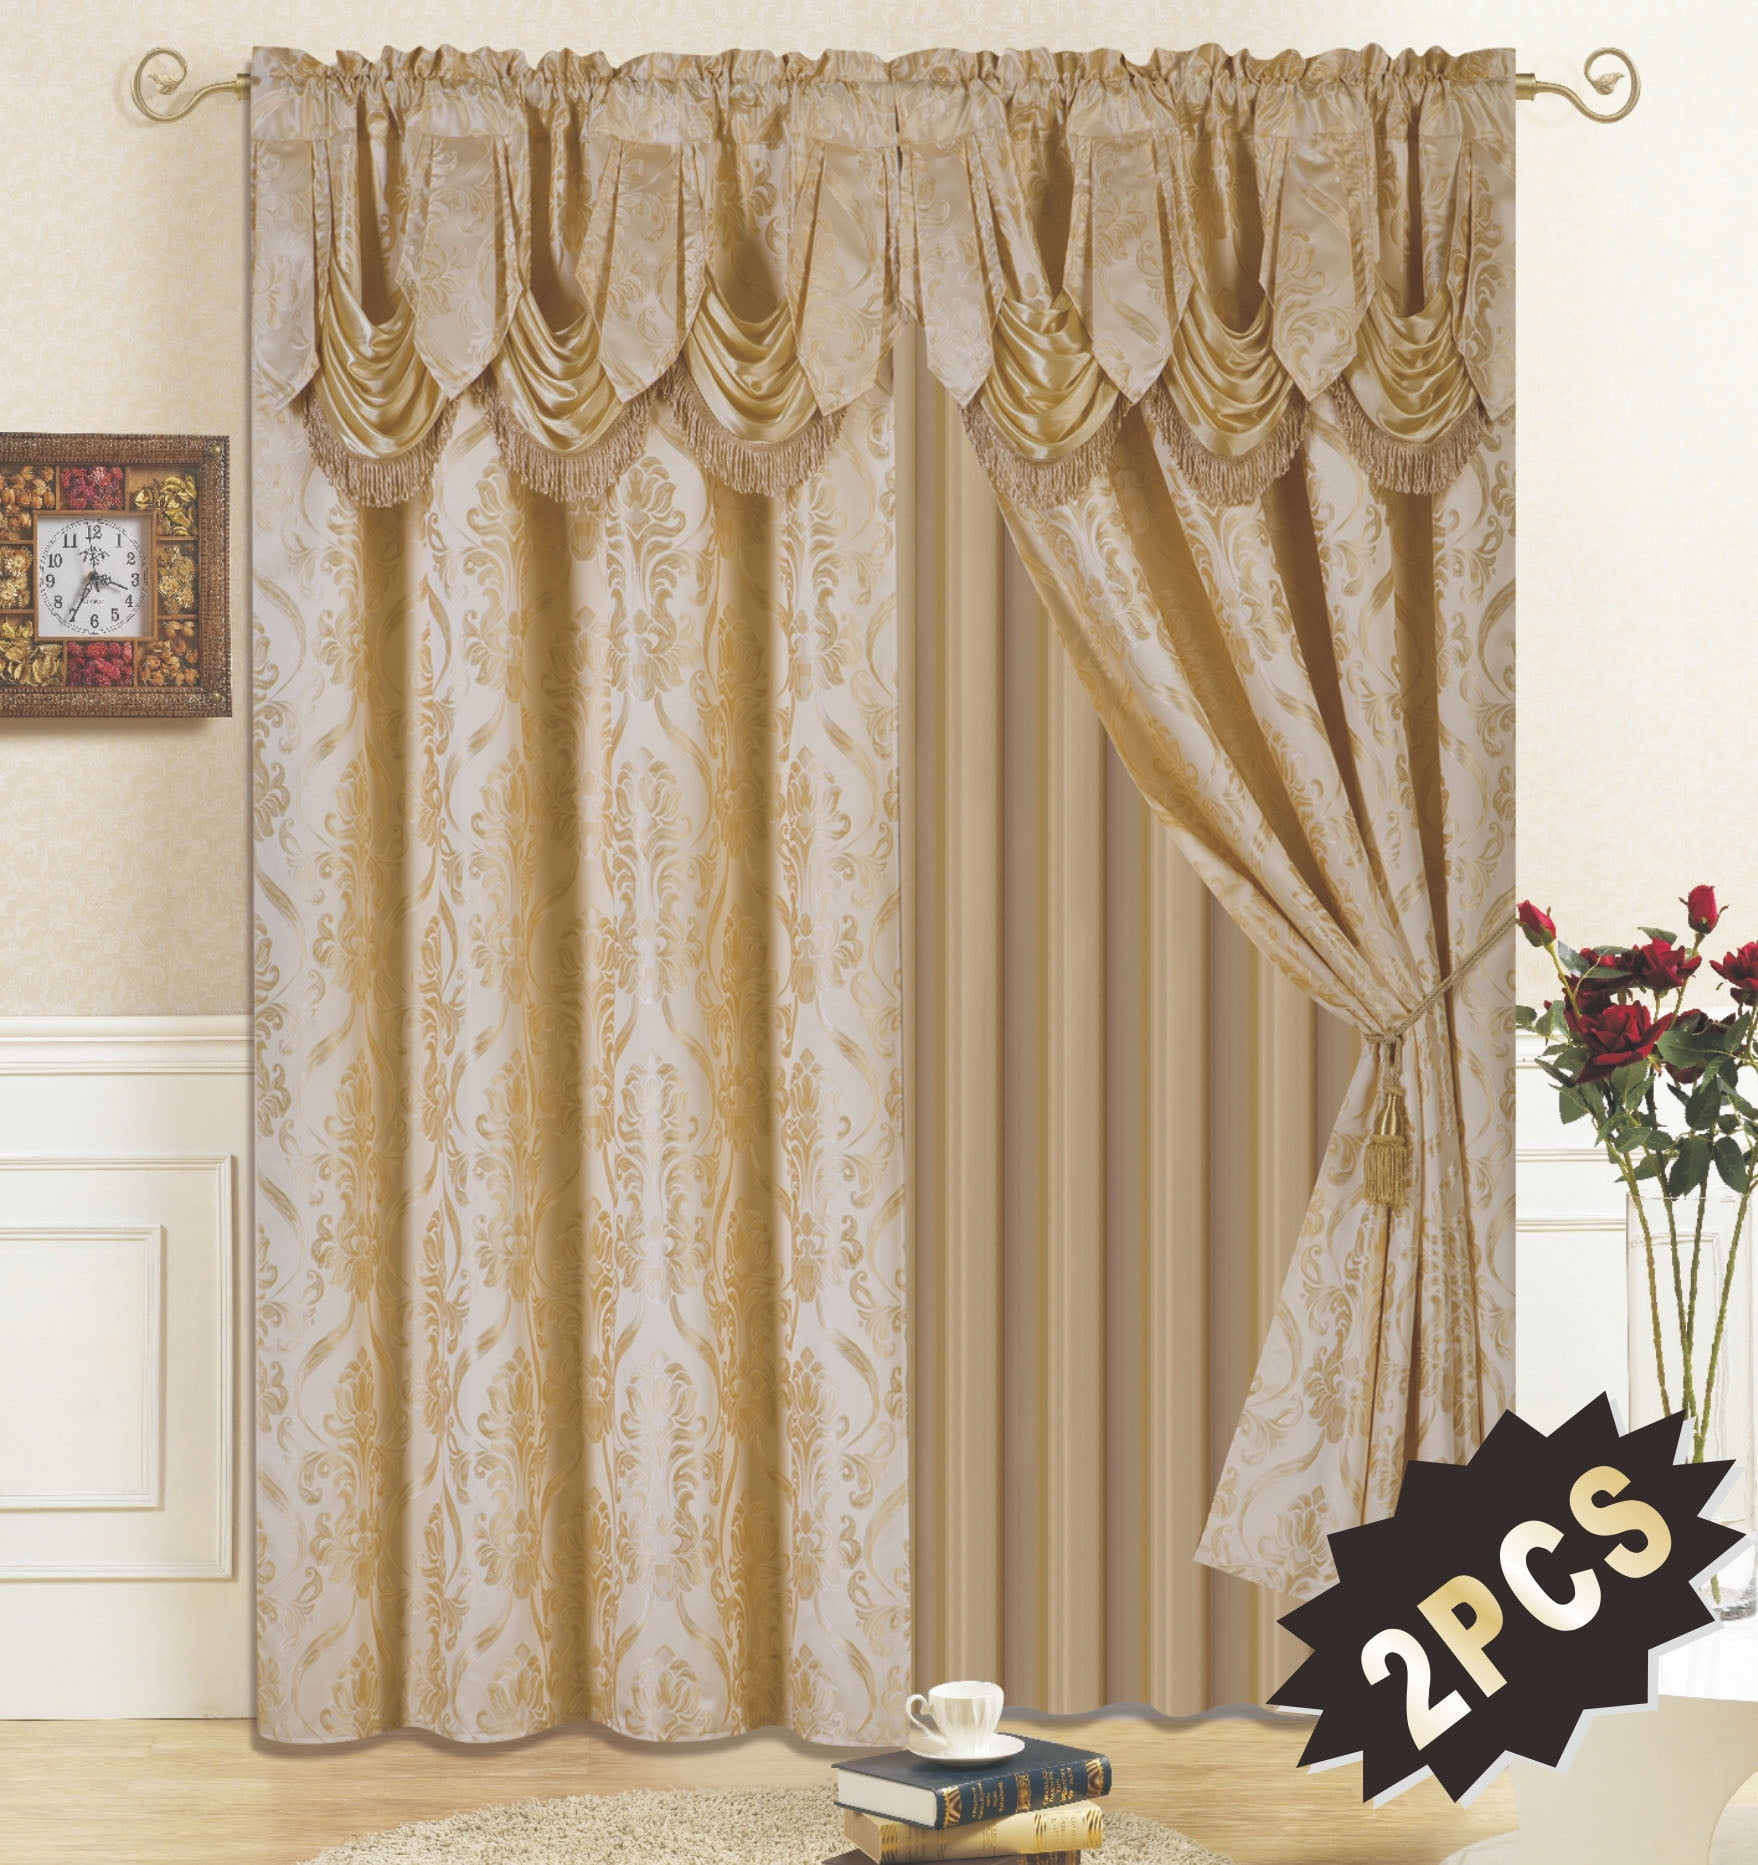 All American Collection New 4 Piece Drape Set with Attached Valance and Sheer with 2 Tie Backs Included 96 Length, Royal Blue 